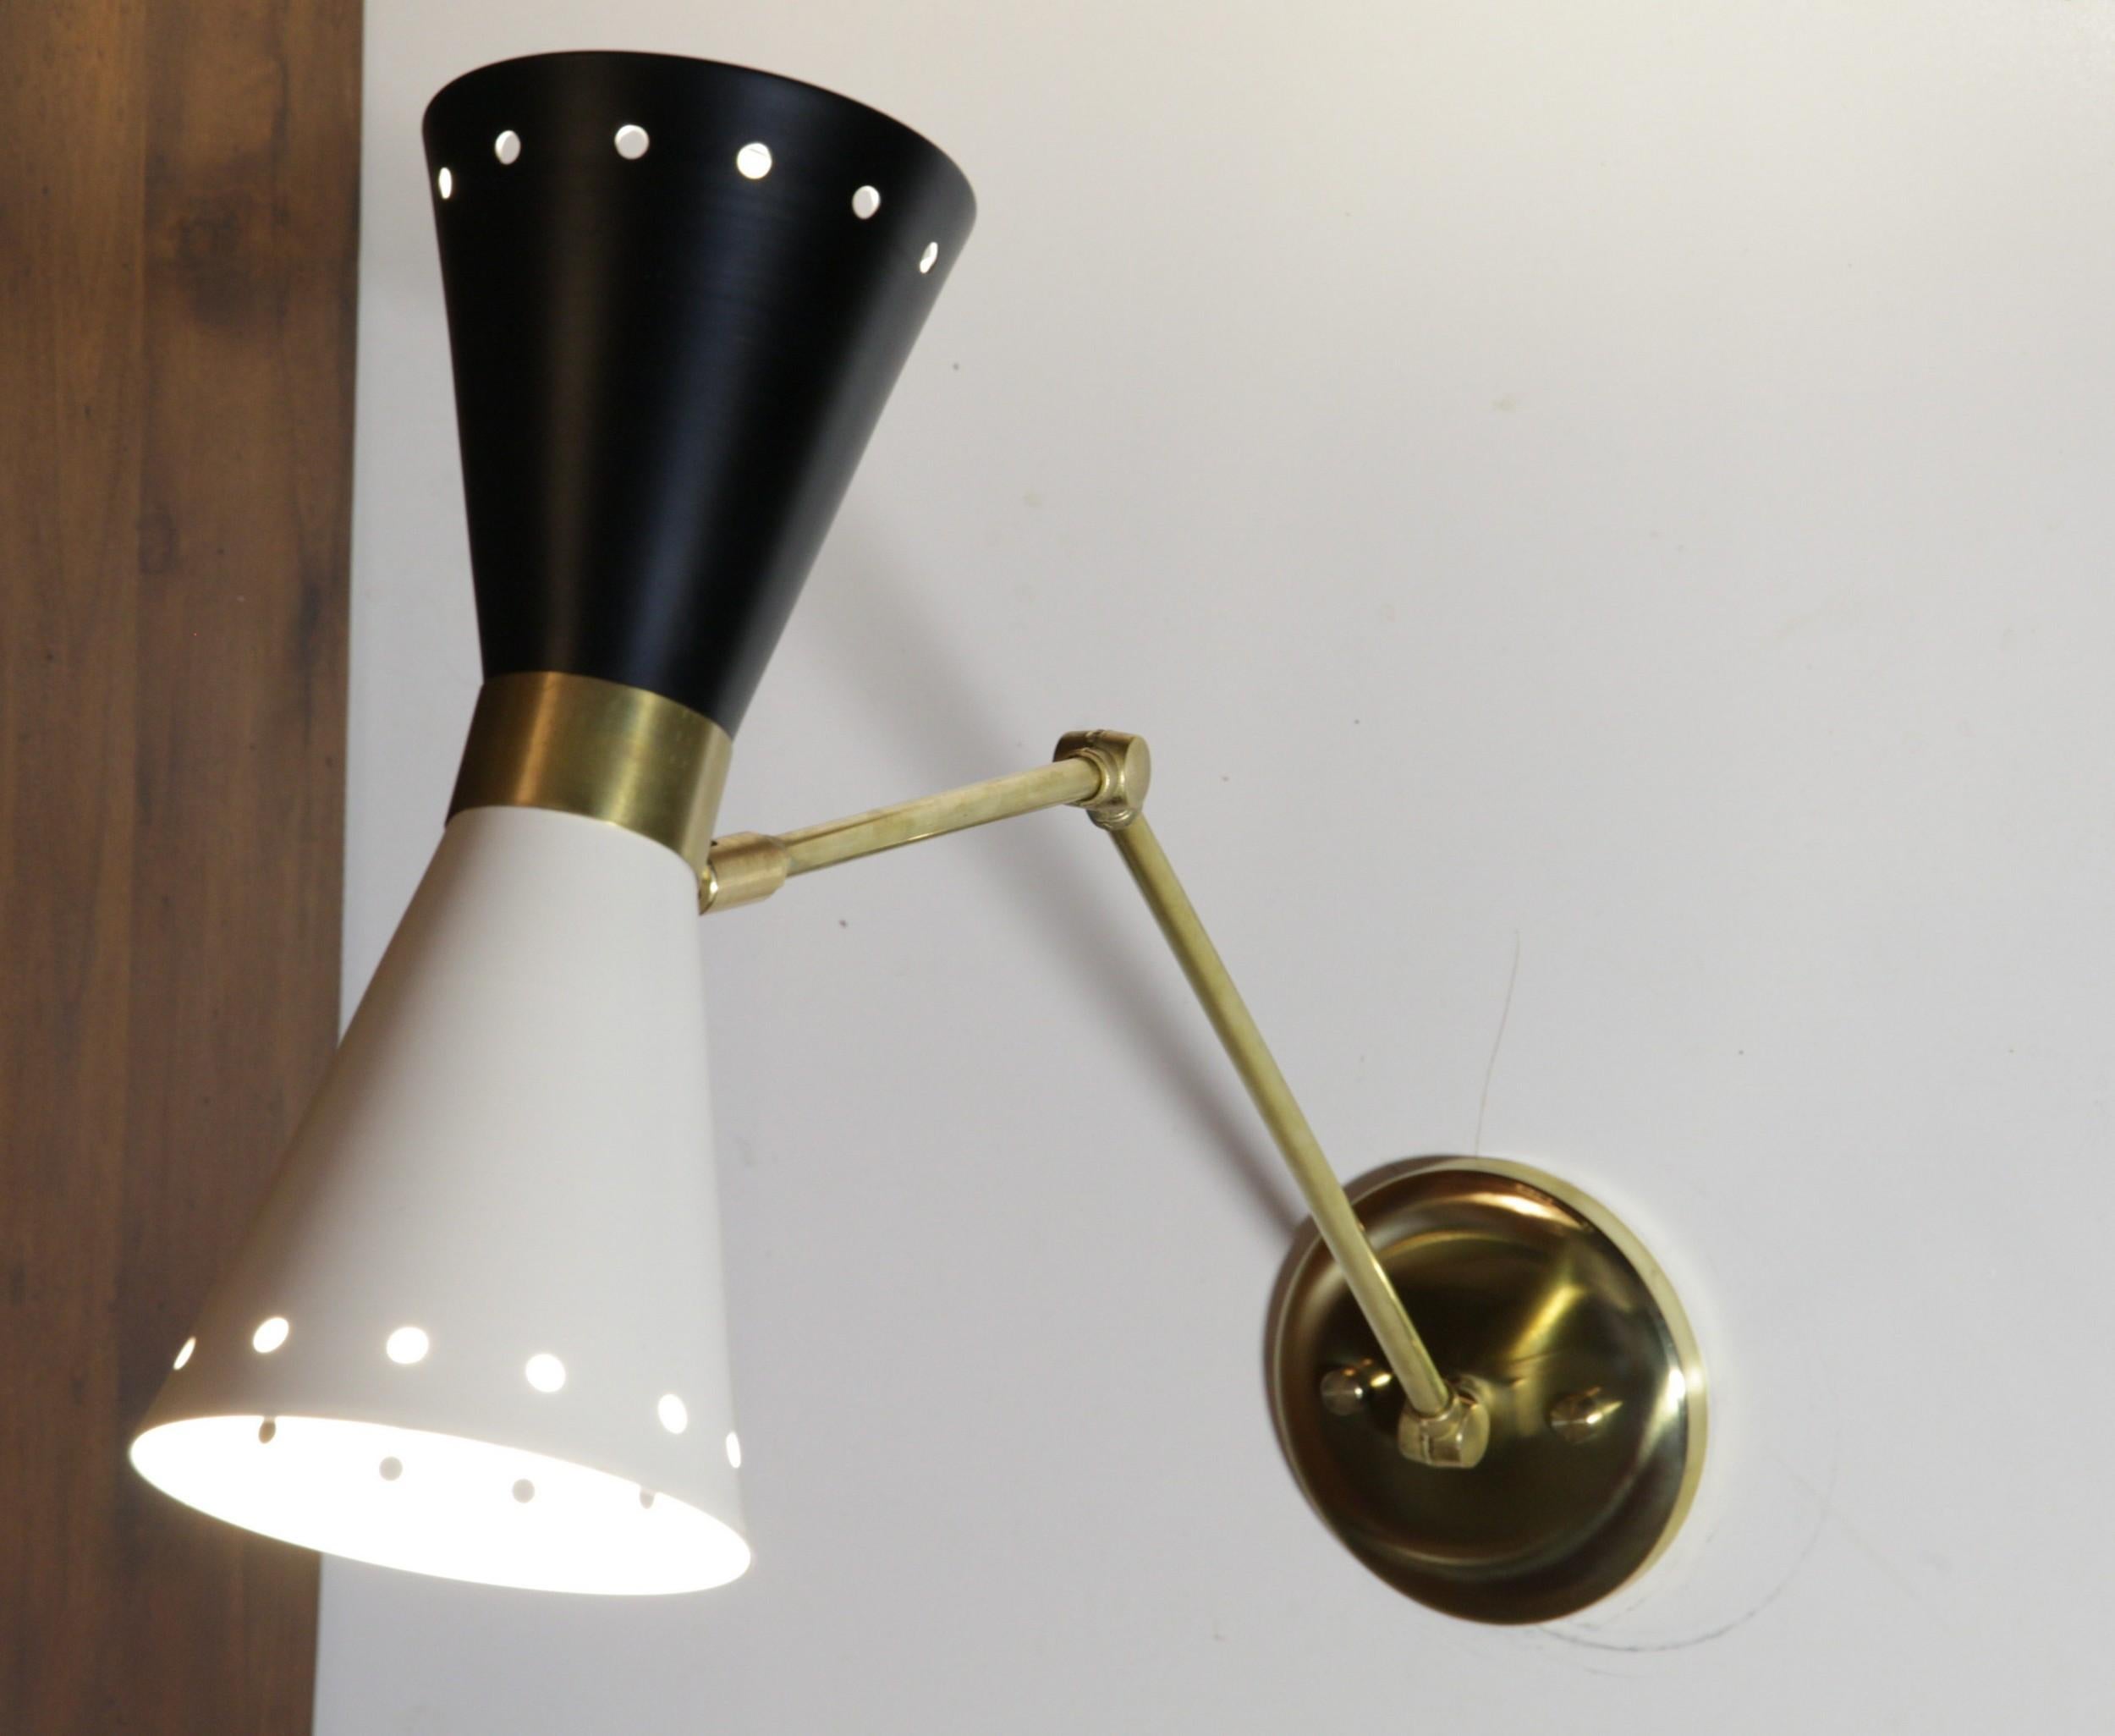 Italian Cono Articulated Sconce Midcentury Stilnovo Style Solid Brass Black White Shade